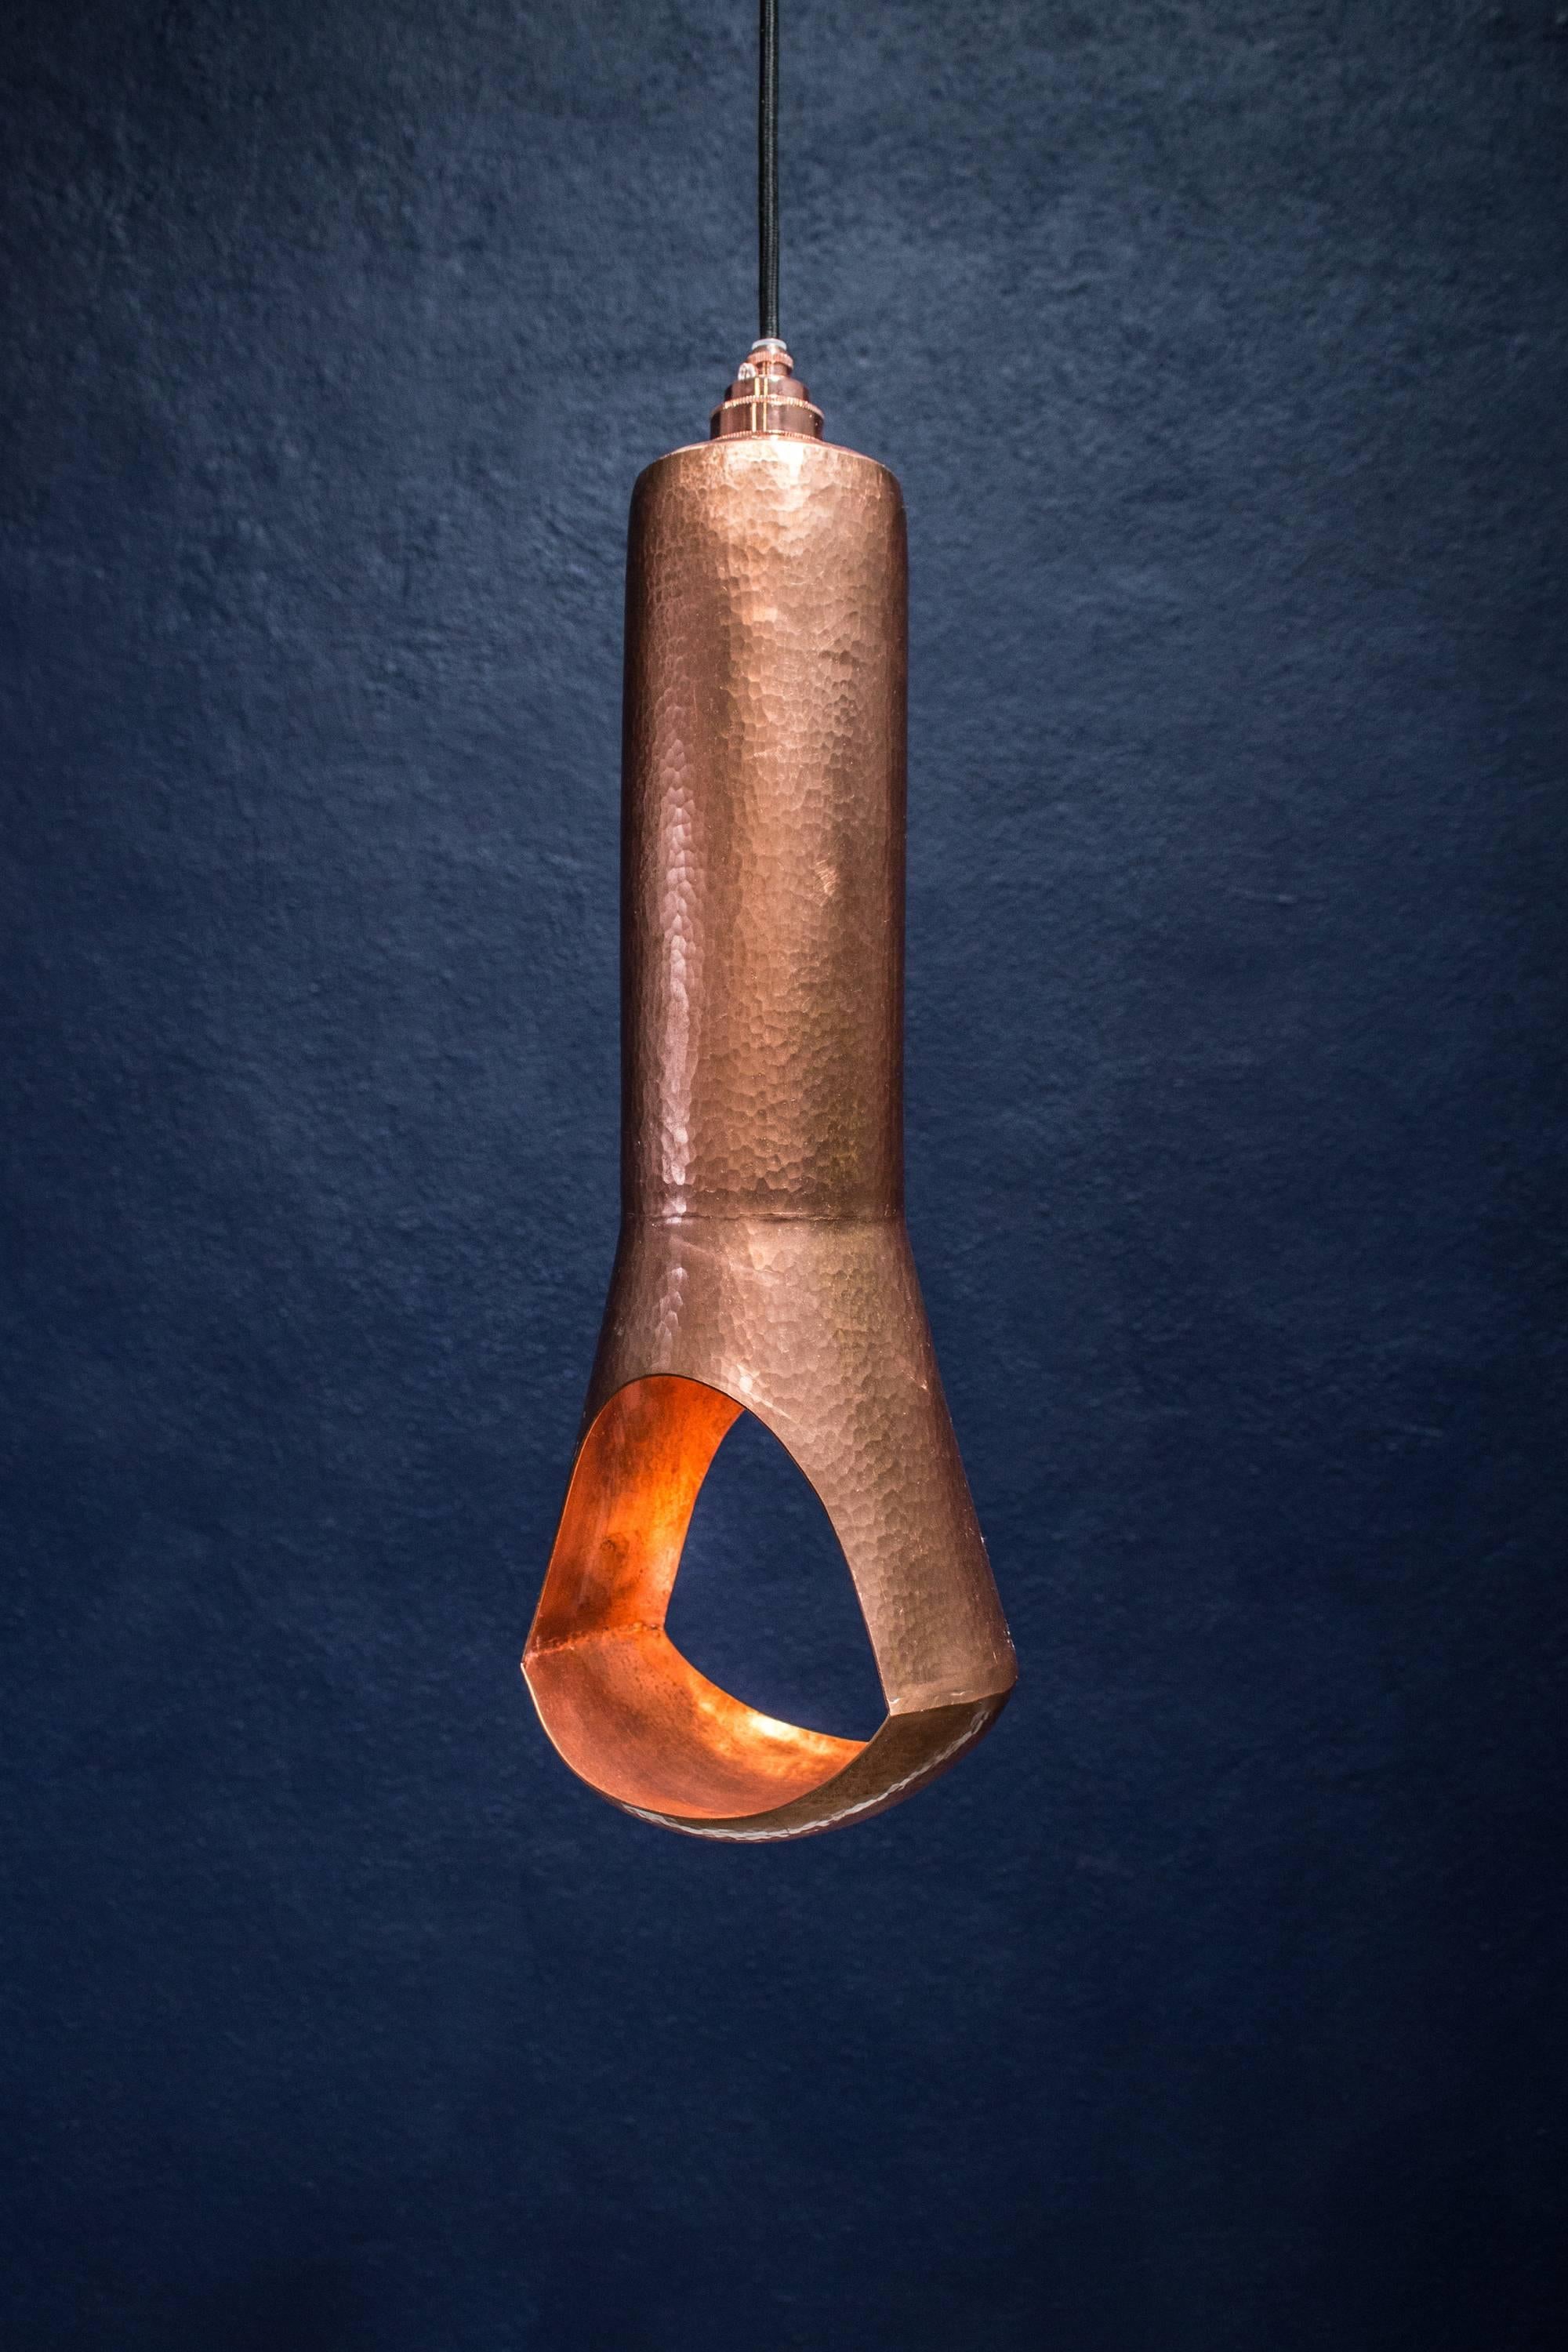 Custom hand hammered copper light made in Mexico. This light has a polished exterior finish, and polished brass interior finish. Take standard E26 bulb.

Kit comes with 1.5 meters of cable, fixture, canopy and LED light bulb. 